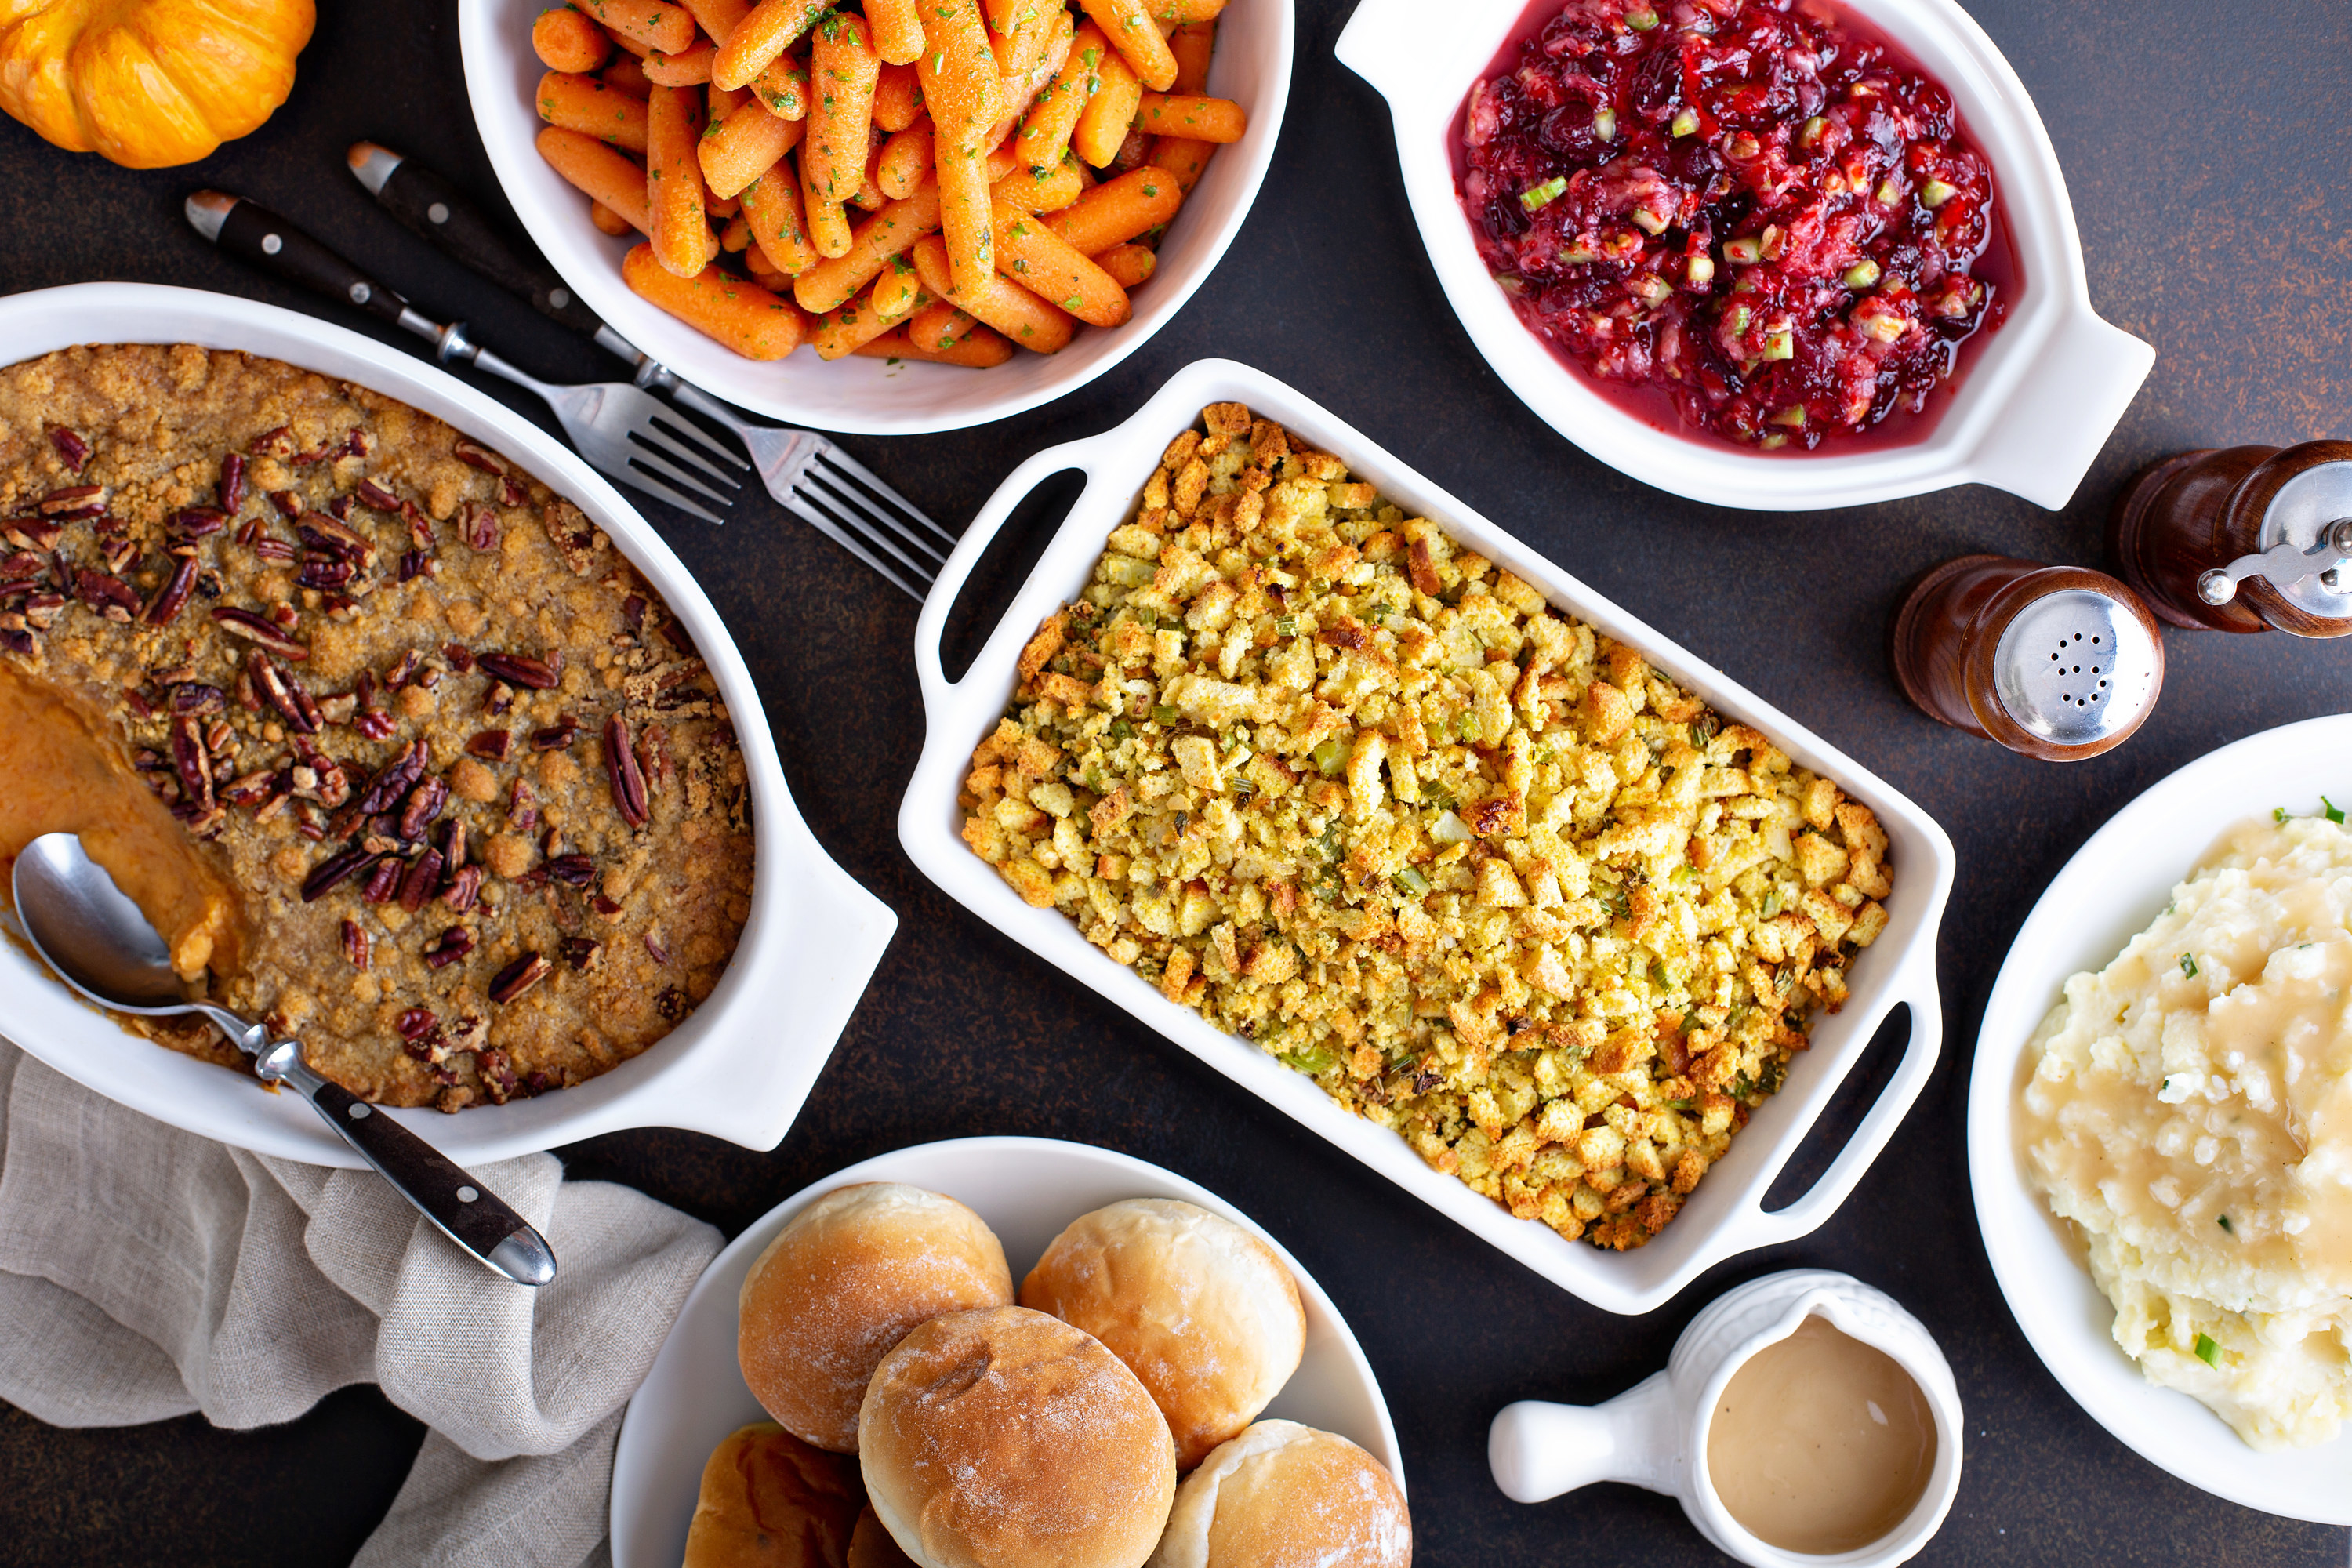 Stuffing, sweet potatoes, corn, and other side dishes